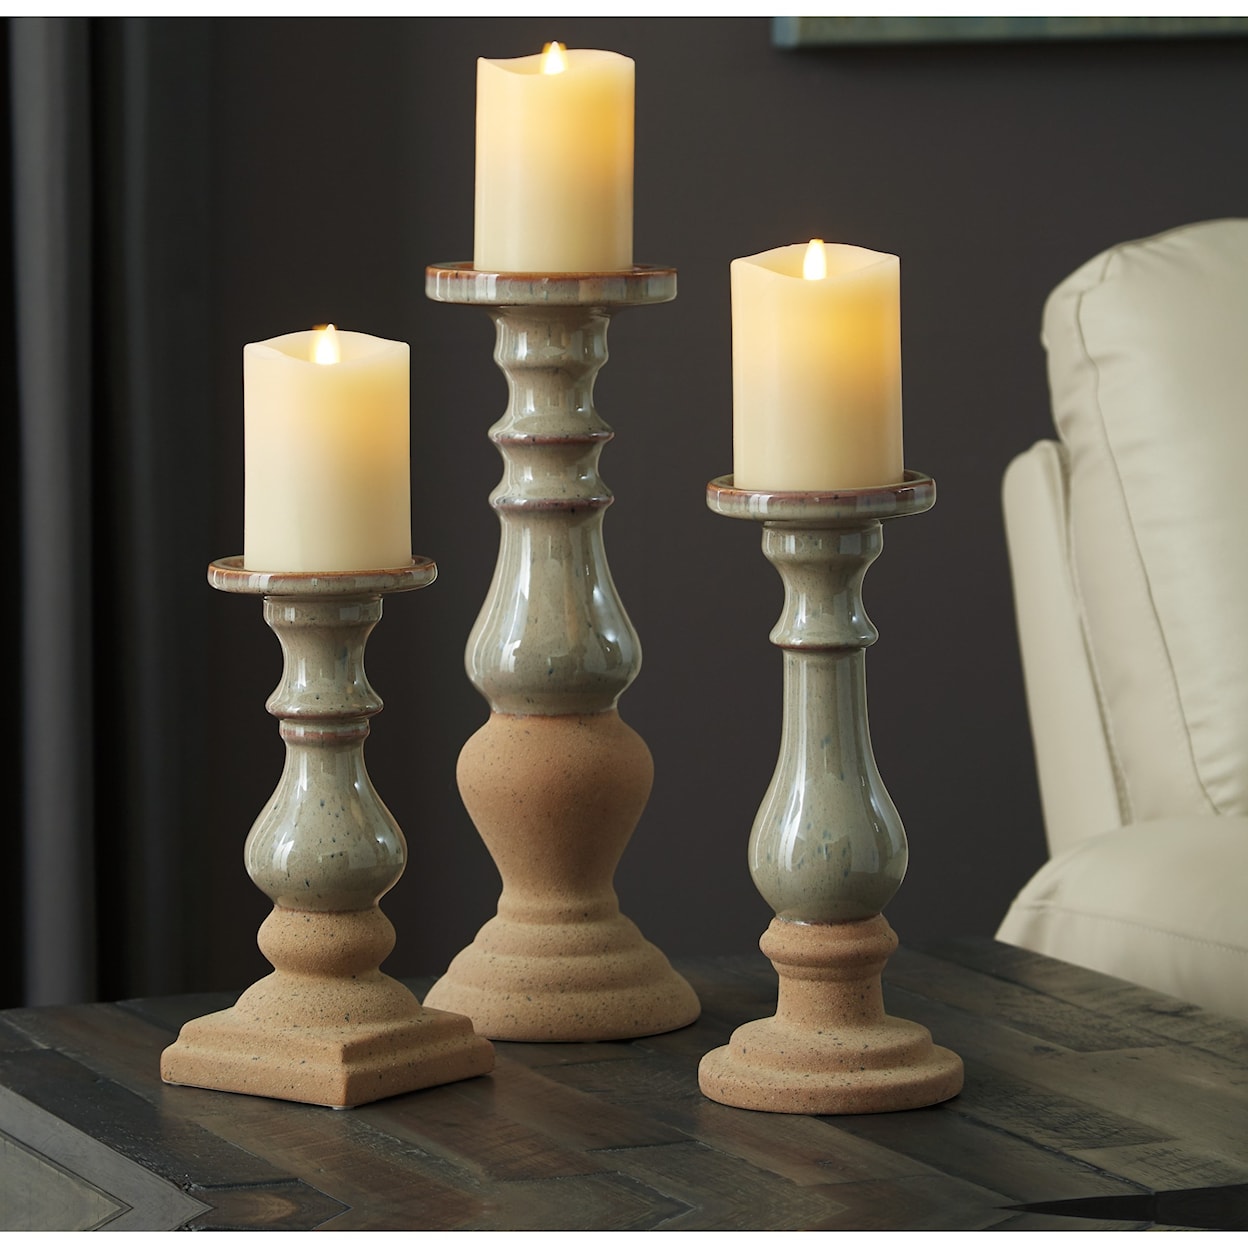 Michael Alan Select Accents Emele Taupe Candle Holder Set